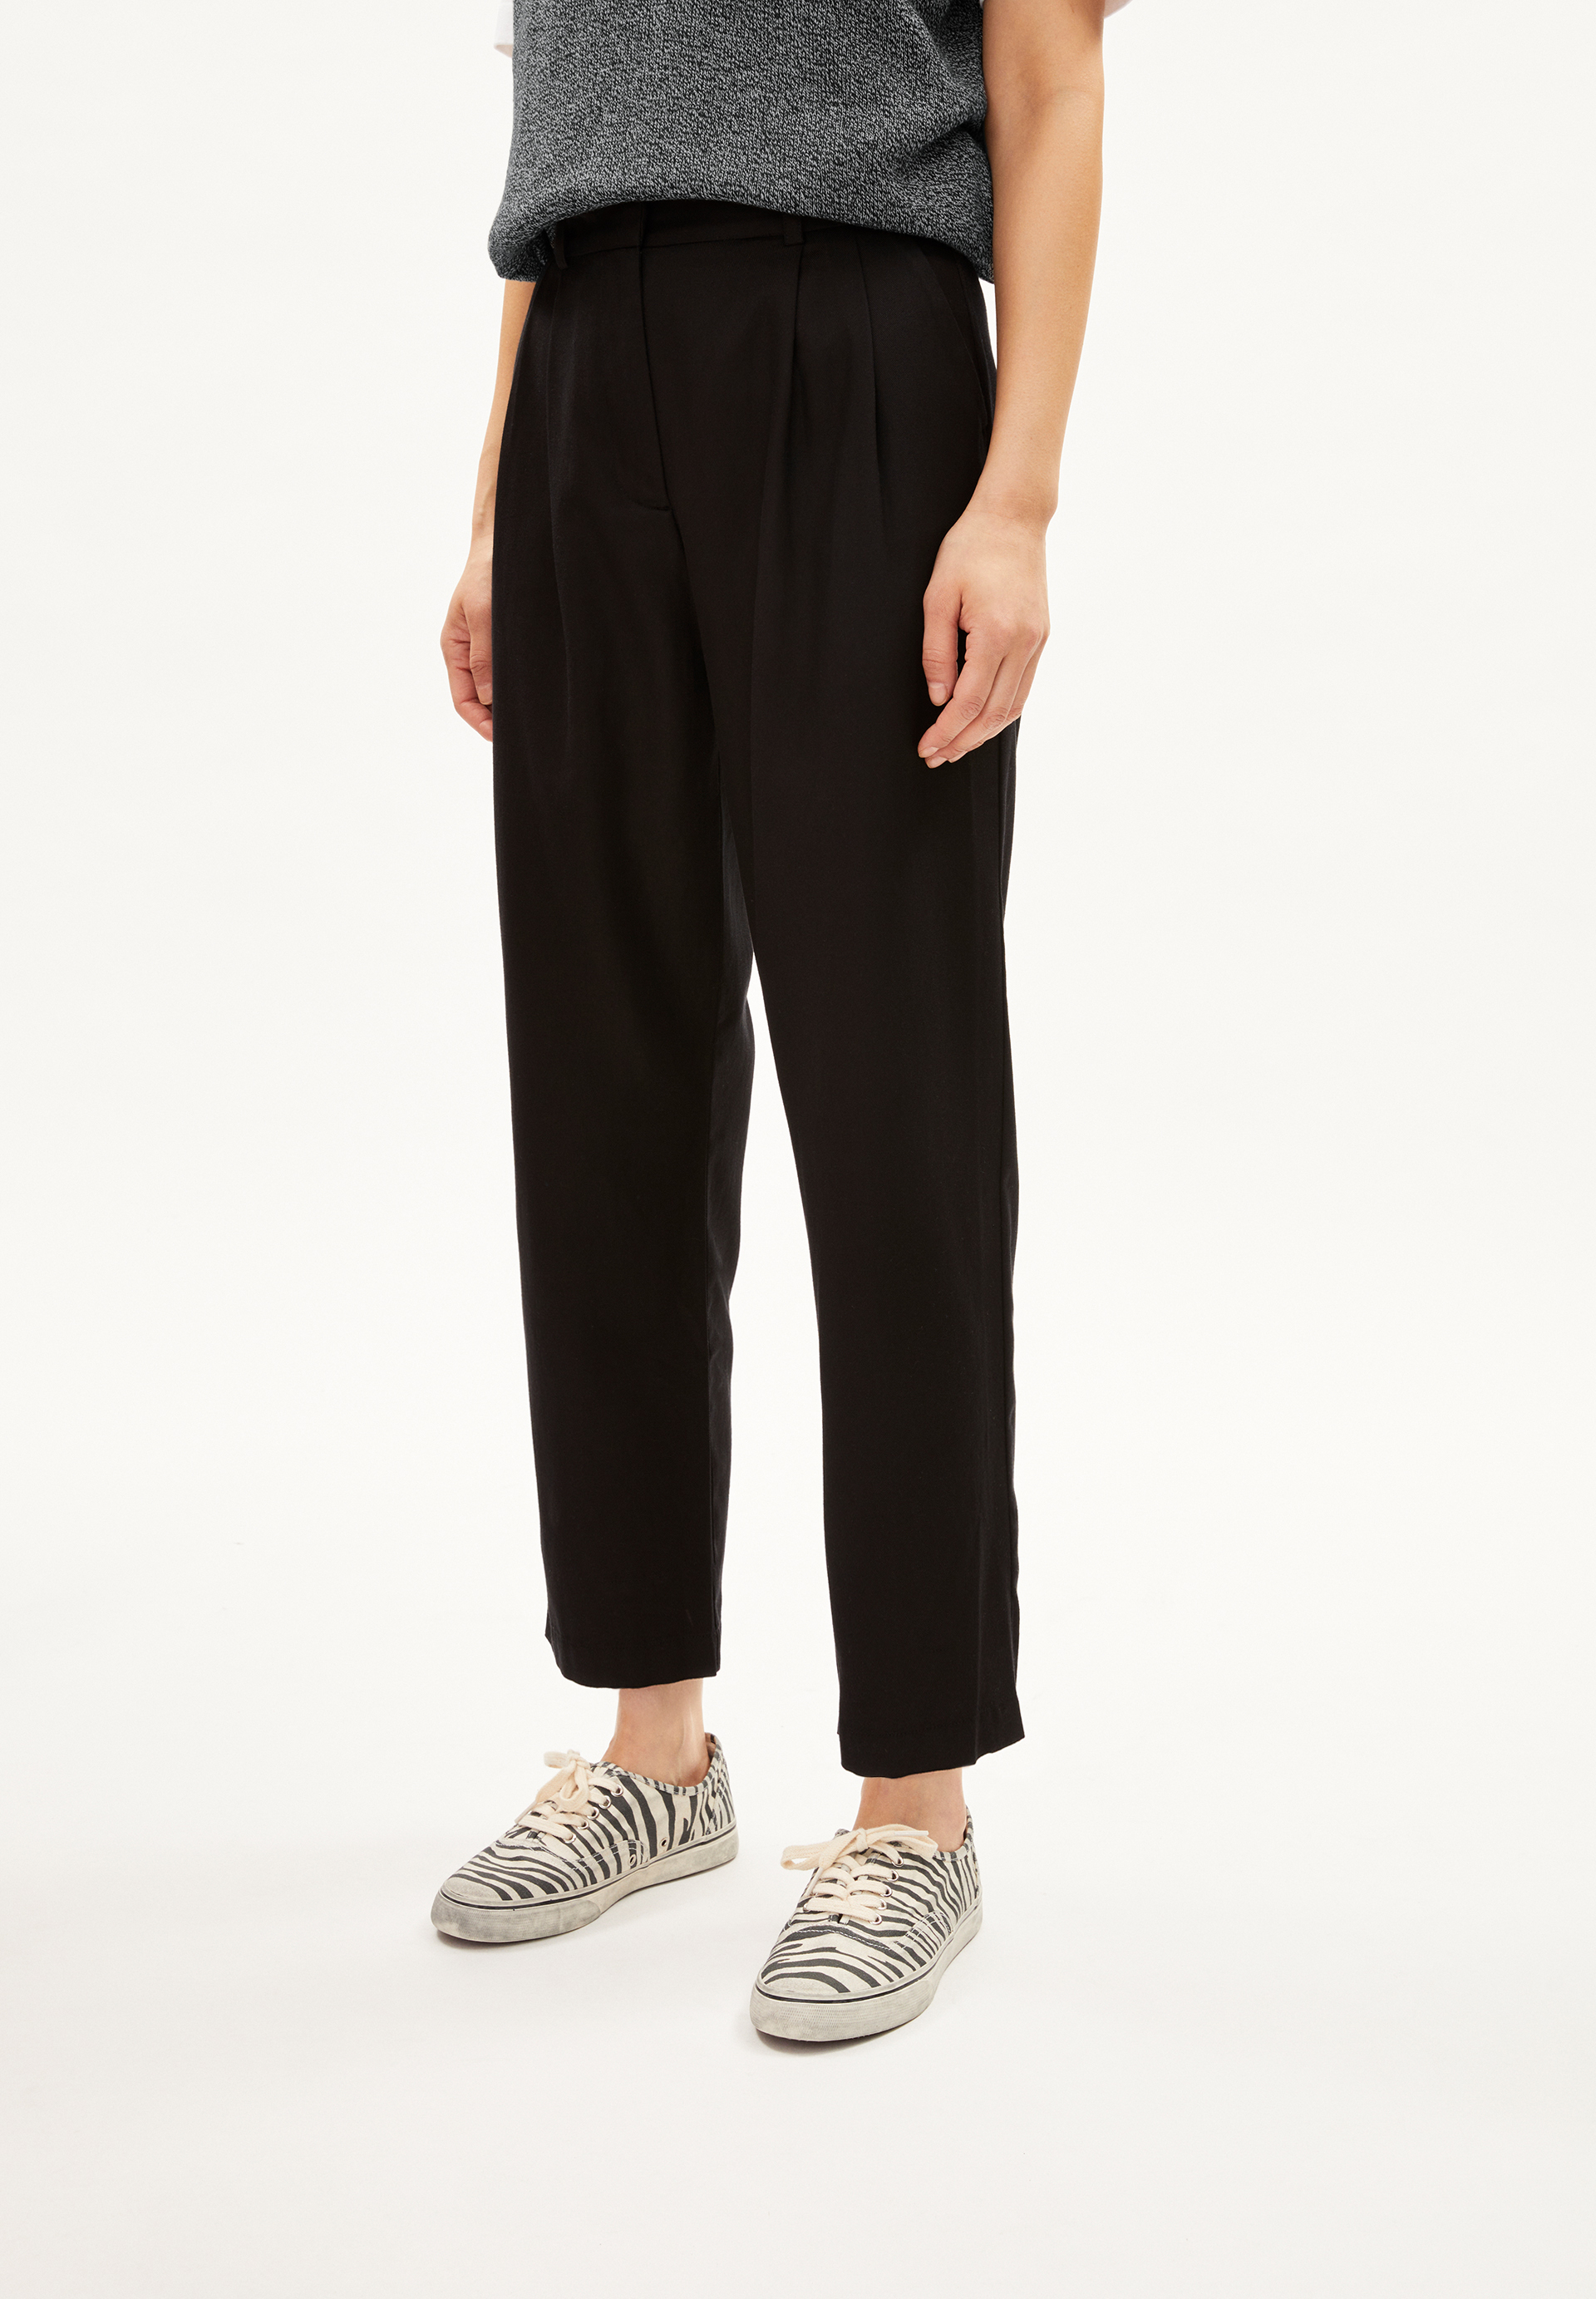 ATETAA Pants Relaxed Fit made of TENCEL™ Lyocell Mix